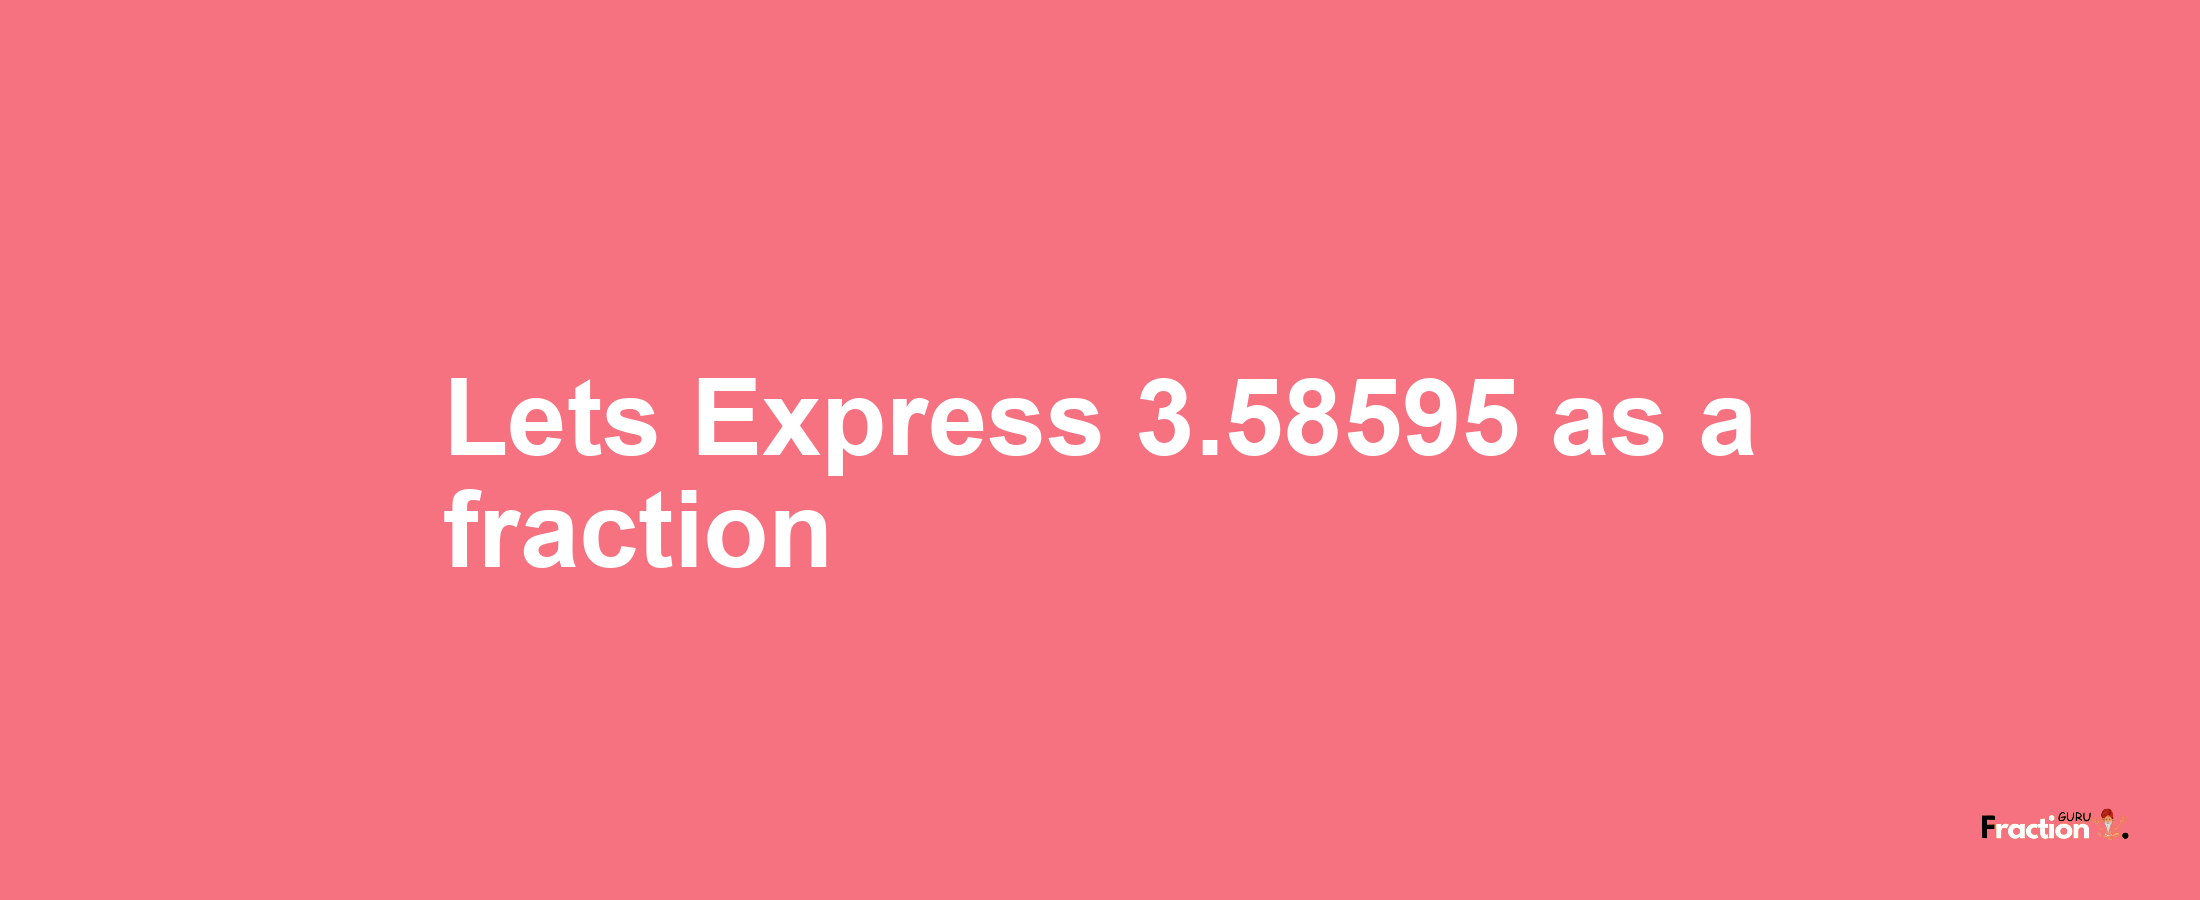 Lets Express 3.58595 as afraction